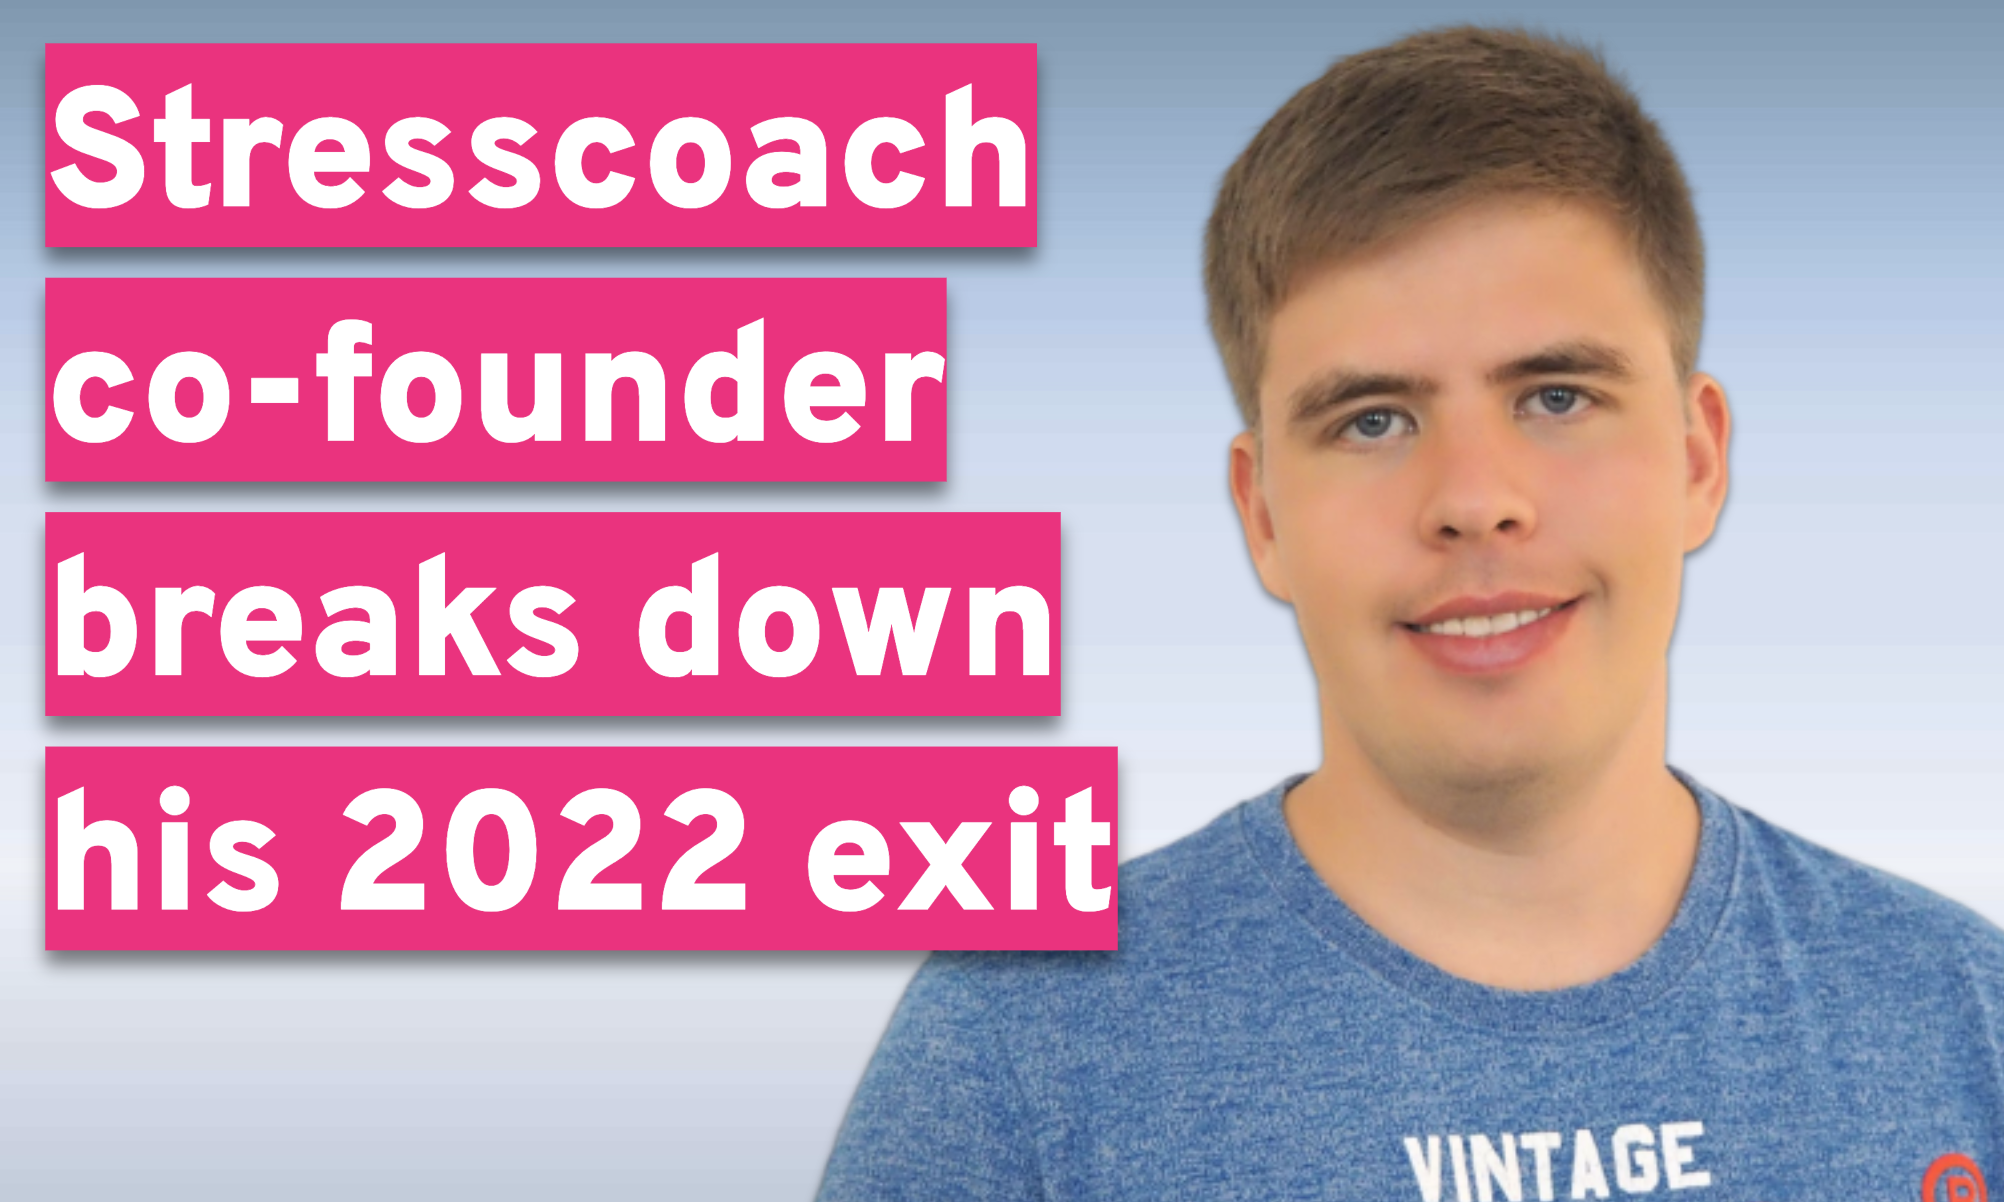 Stresscoach co-founder breaks down his 2022 exit